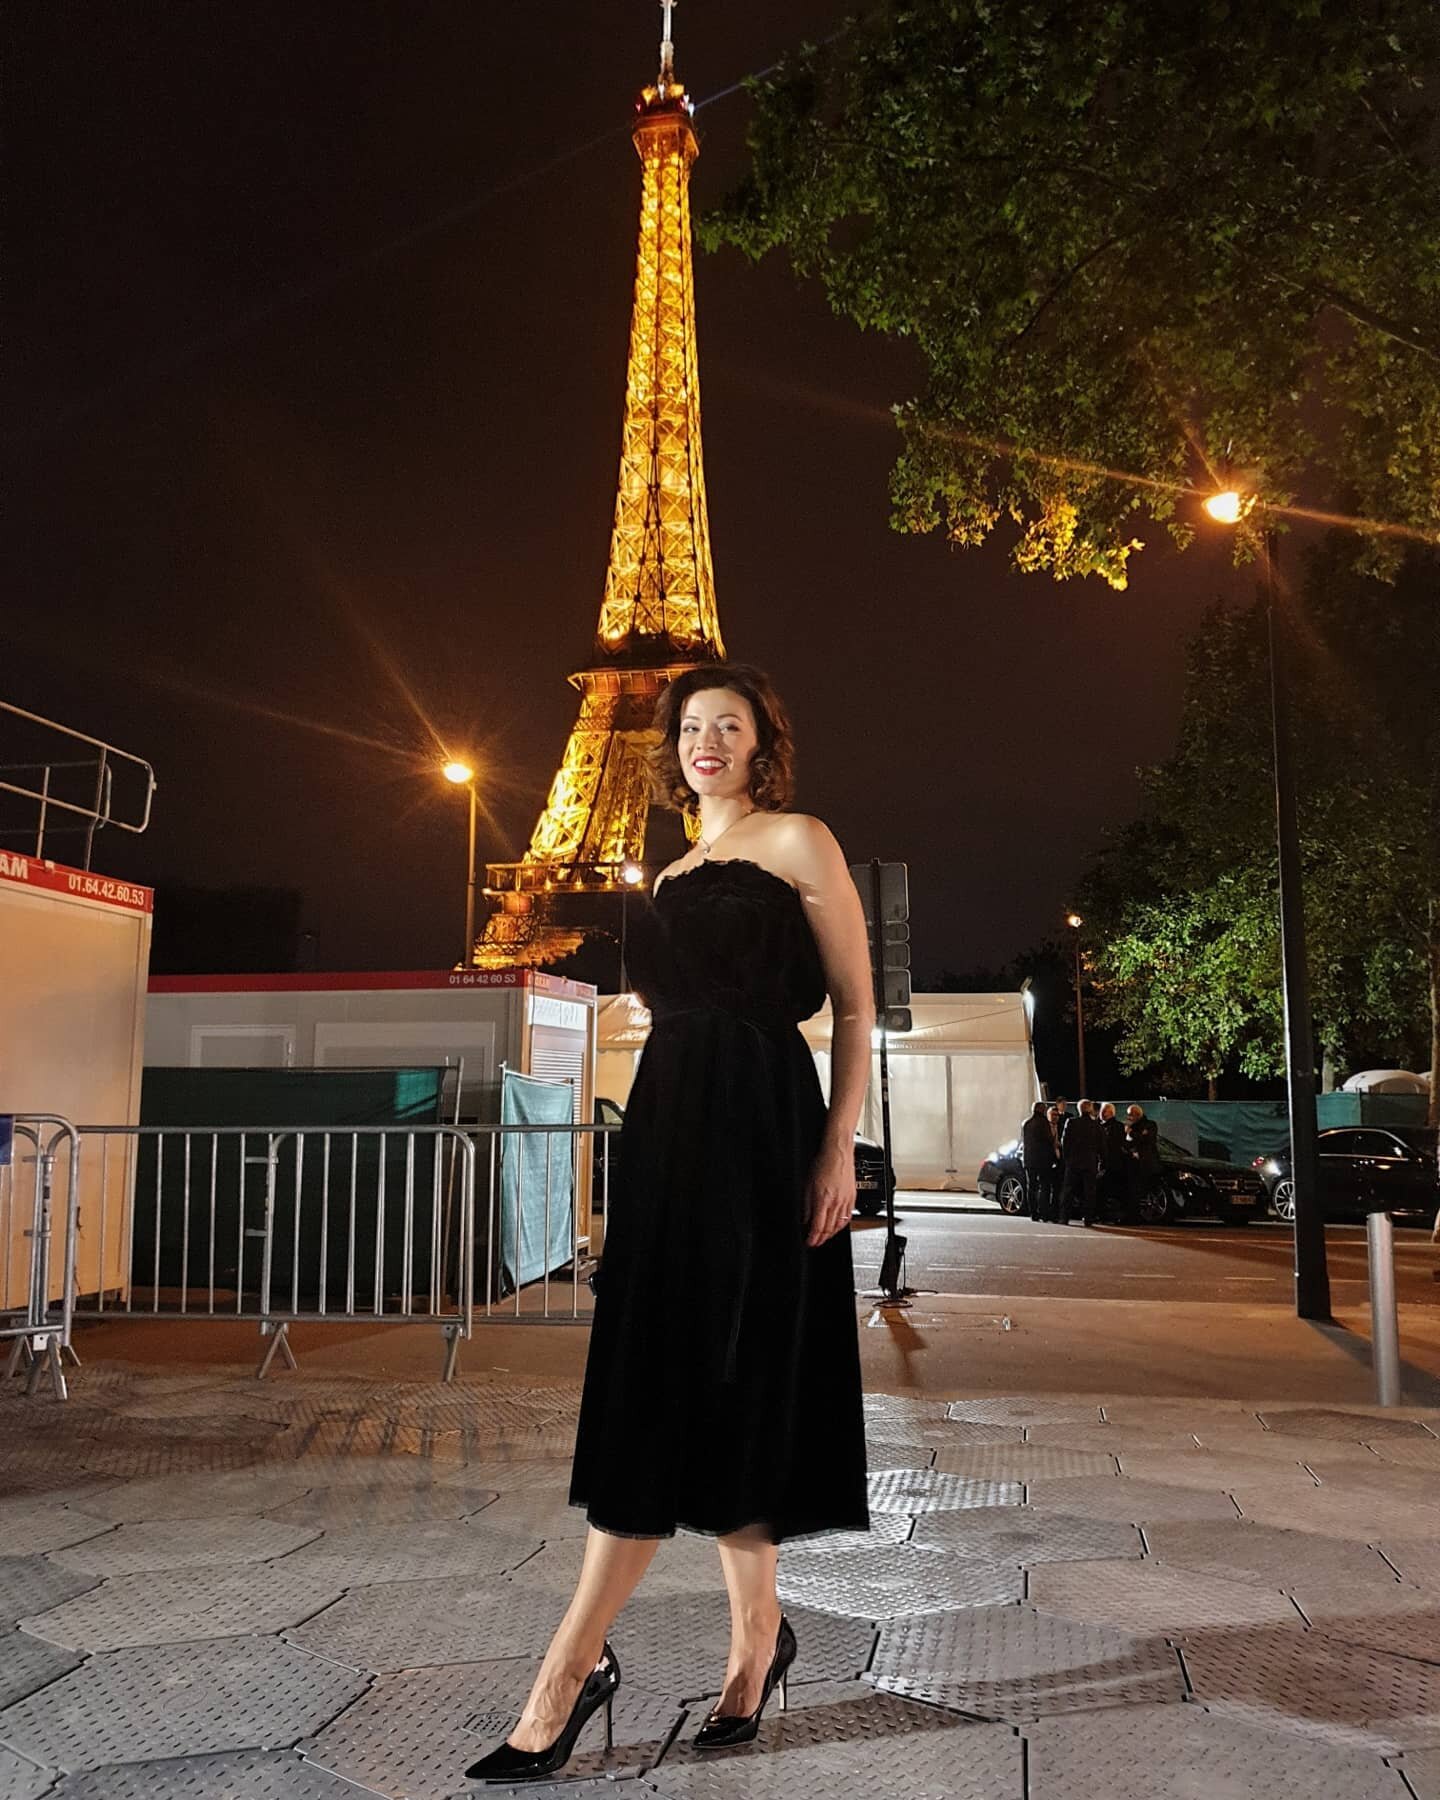 Vive le France! Merci et au revoir! 

Thank you to all involved in this spectacular concert- @orchestrenationaldefrance , #SimoneYoung , the wonderful production team and everyone involved into putting the show together

#eiffeltower #accordion #acco